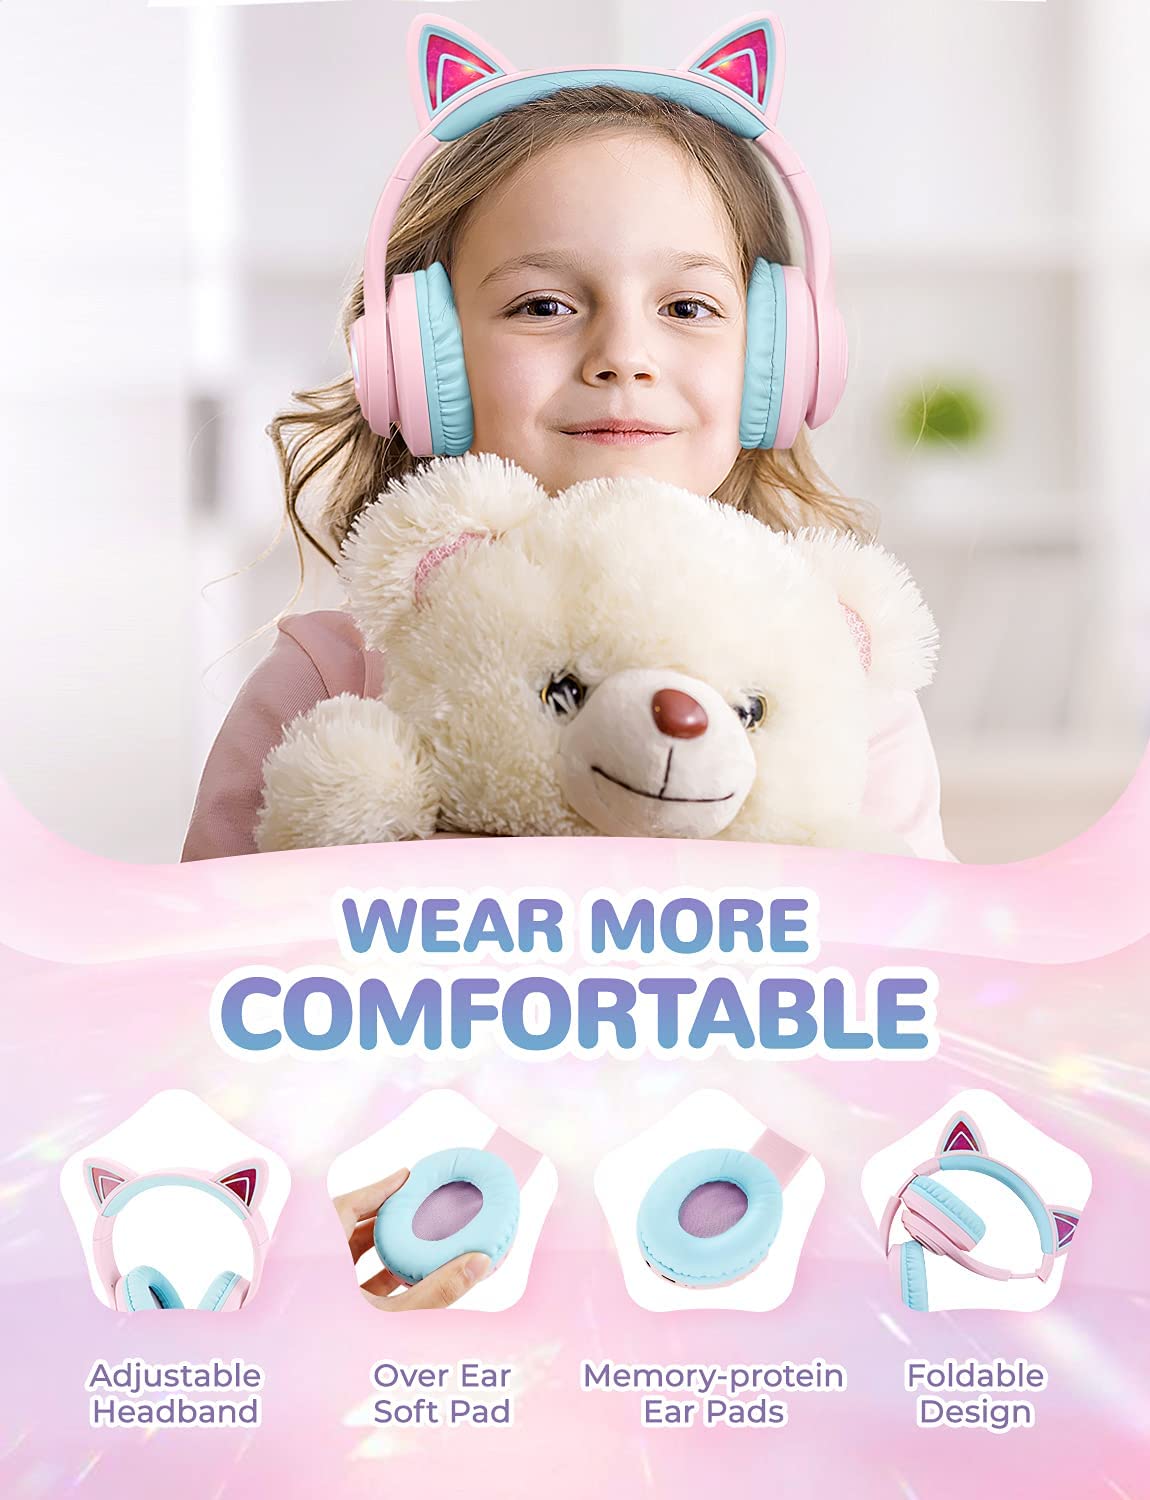 iClever Cat Ear Bluetooth Headphones RGB LED Light Up Over Ear with Microphone, 74/85/94dB Volume Limiting Comfort Foldable Wireless Headset for PC/Tablet/TV Kids Girls & Boys Teens, BTH13 Pink.